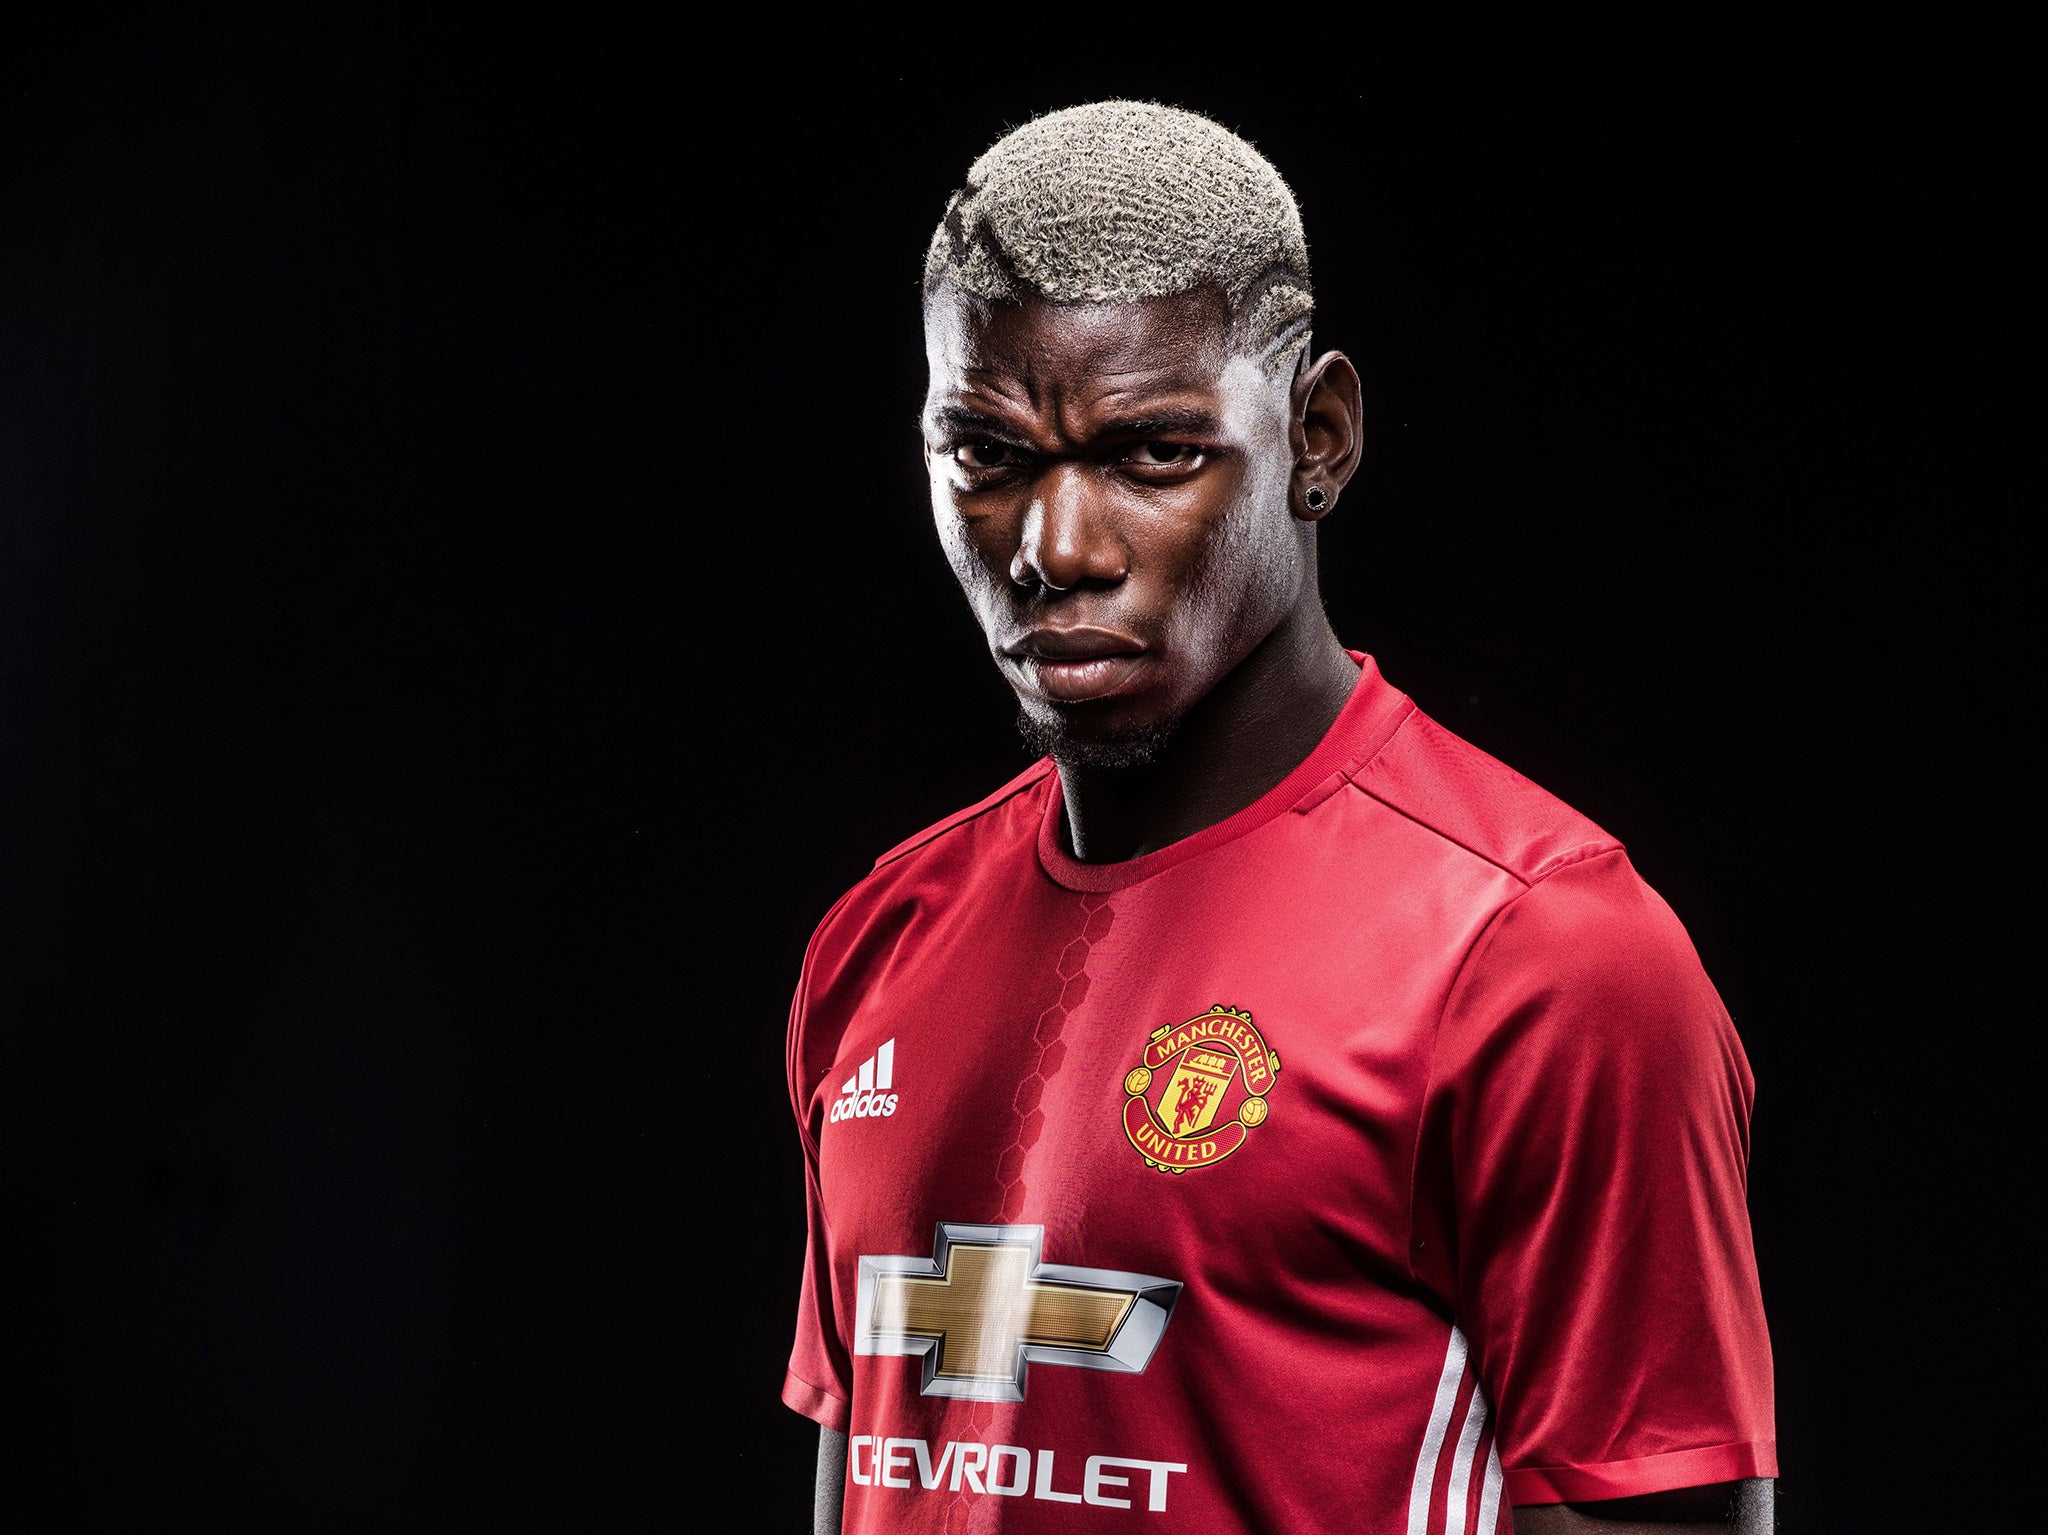 Paul Pogba returned to United in a world-record transfer